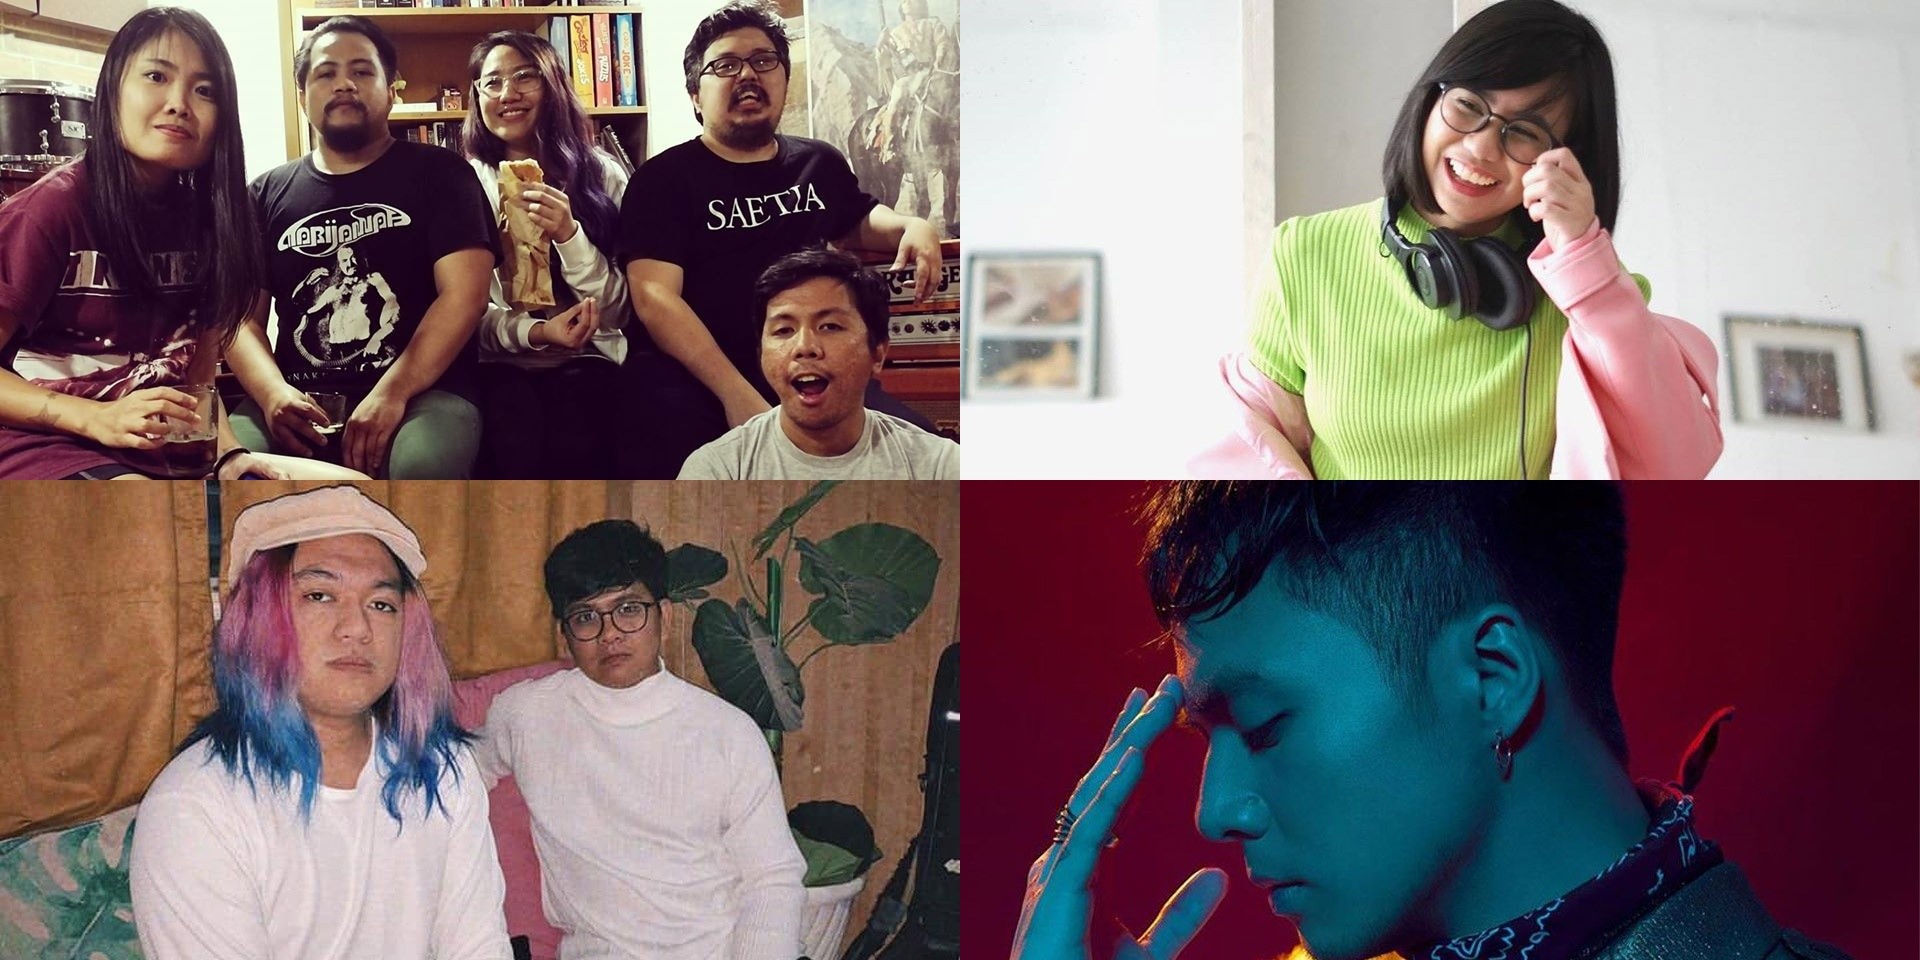 Irrevocable, Pamcy, Mandaue Nights, Sam Concepcion, and more release new music – listen